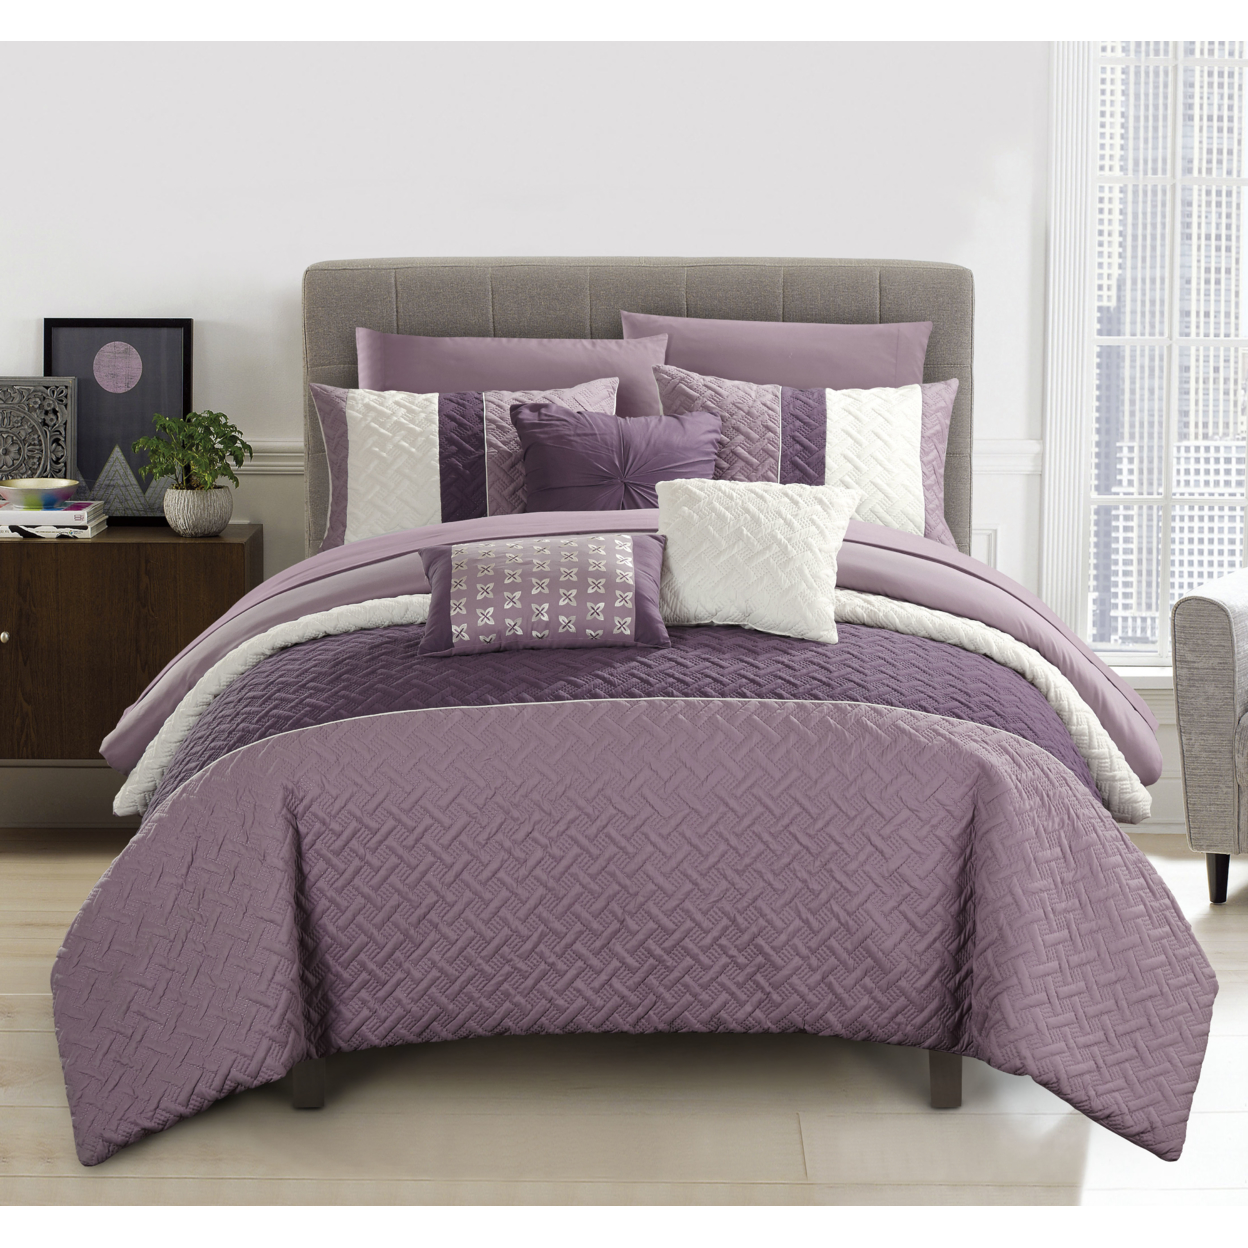 Chic Home Shaila 10 or 8 Piece Comforter Set Color Block Quilted Embroidered Design Bed in a Bag Bedding - Plum, King - king purple